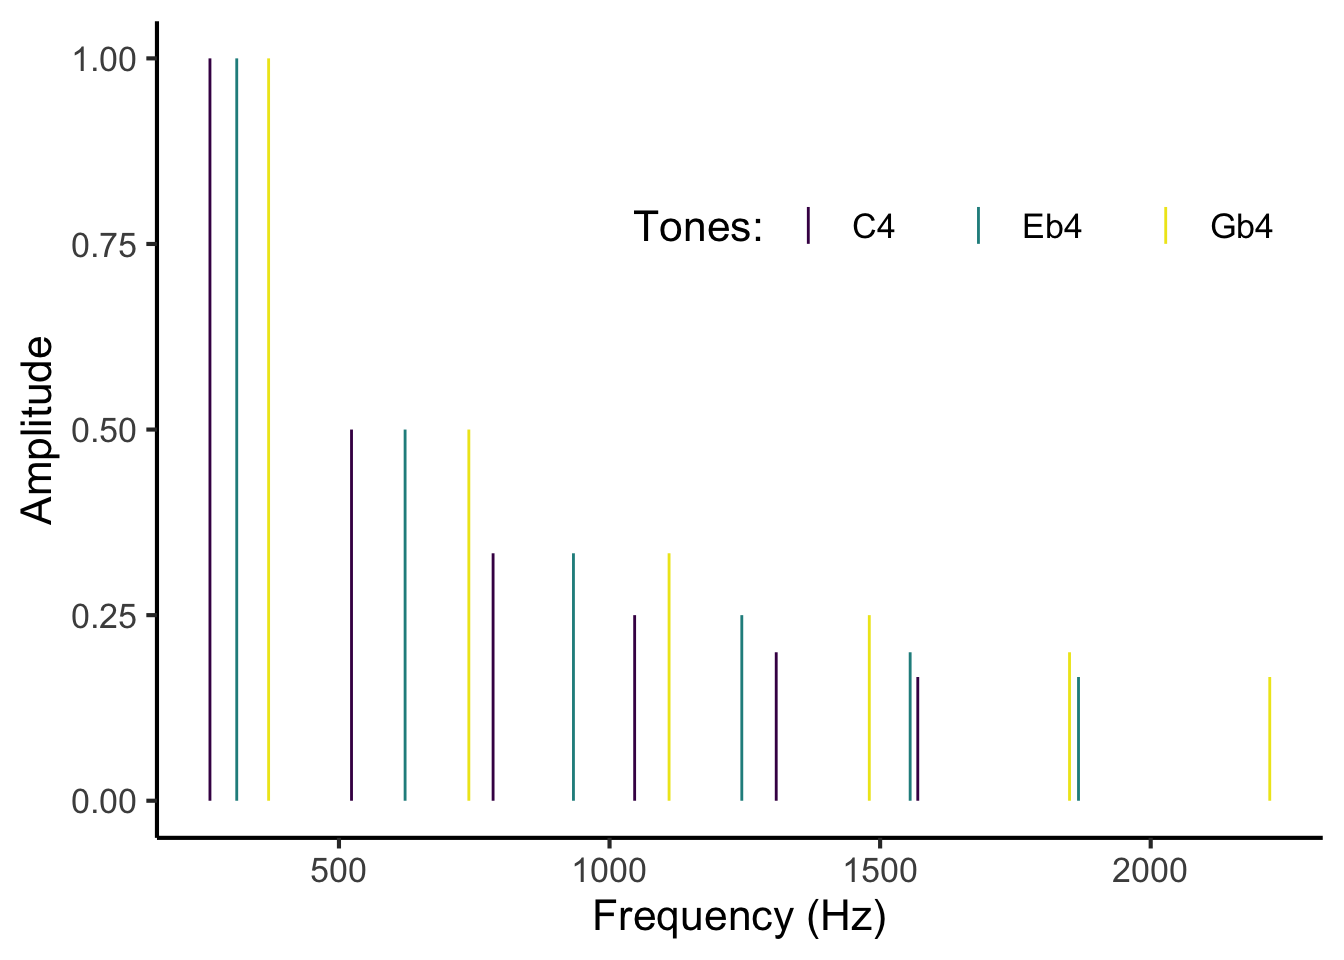 Frequency spectrum for a closed C diminished triad rooted on middle C (C4). The chord is modelled as containing 6 harmonics per tone, with amplitudes following a harmonic series. The three tones are differentiated by three different colours.